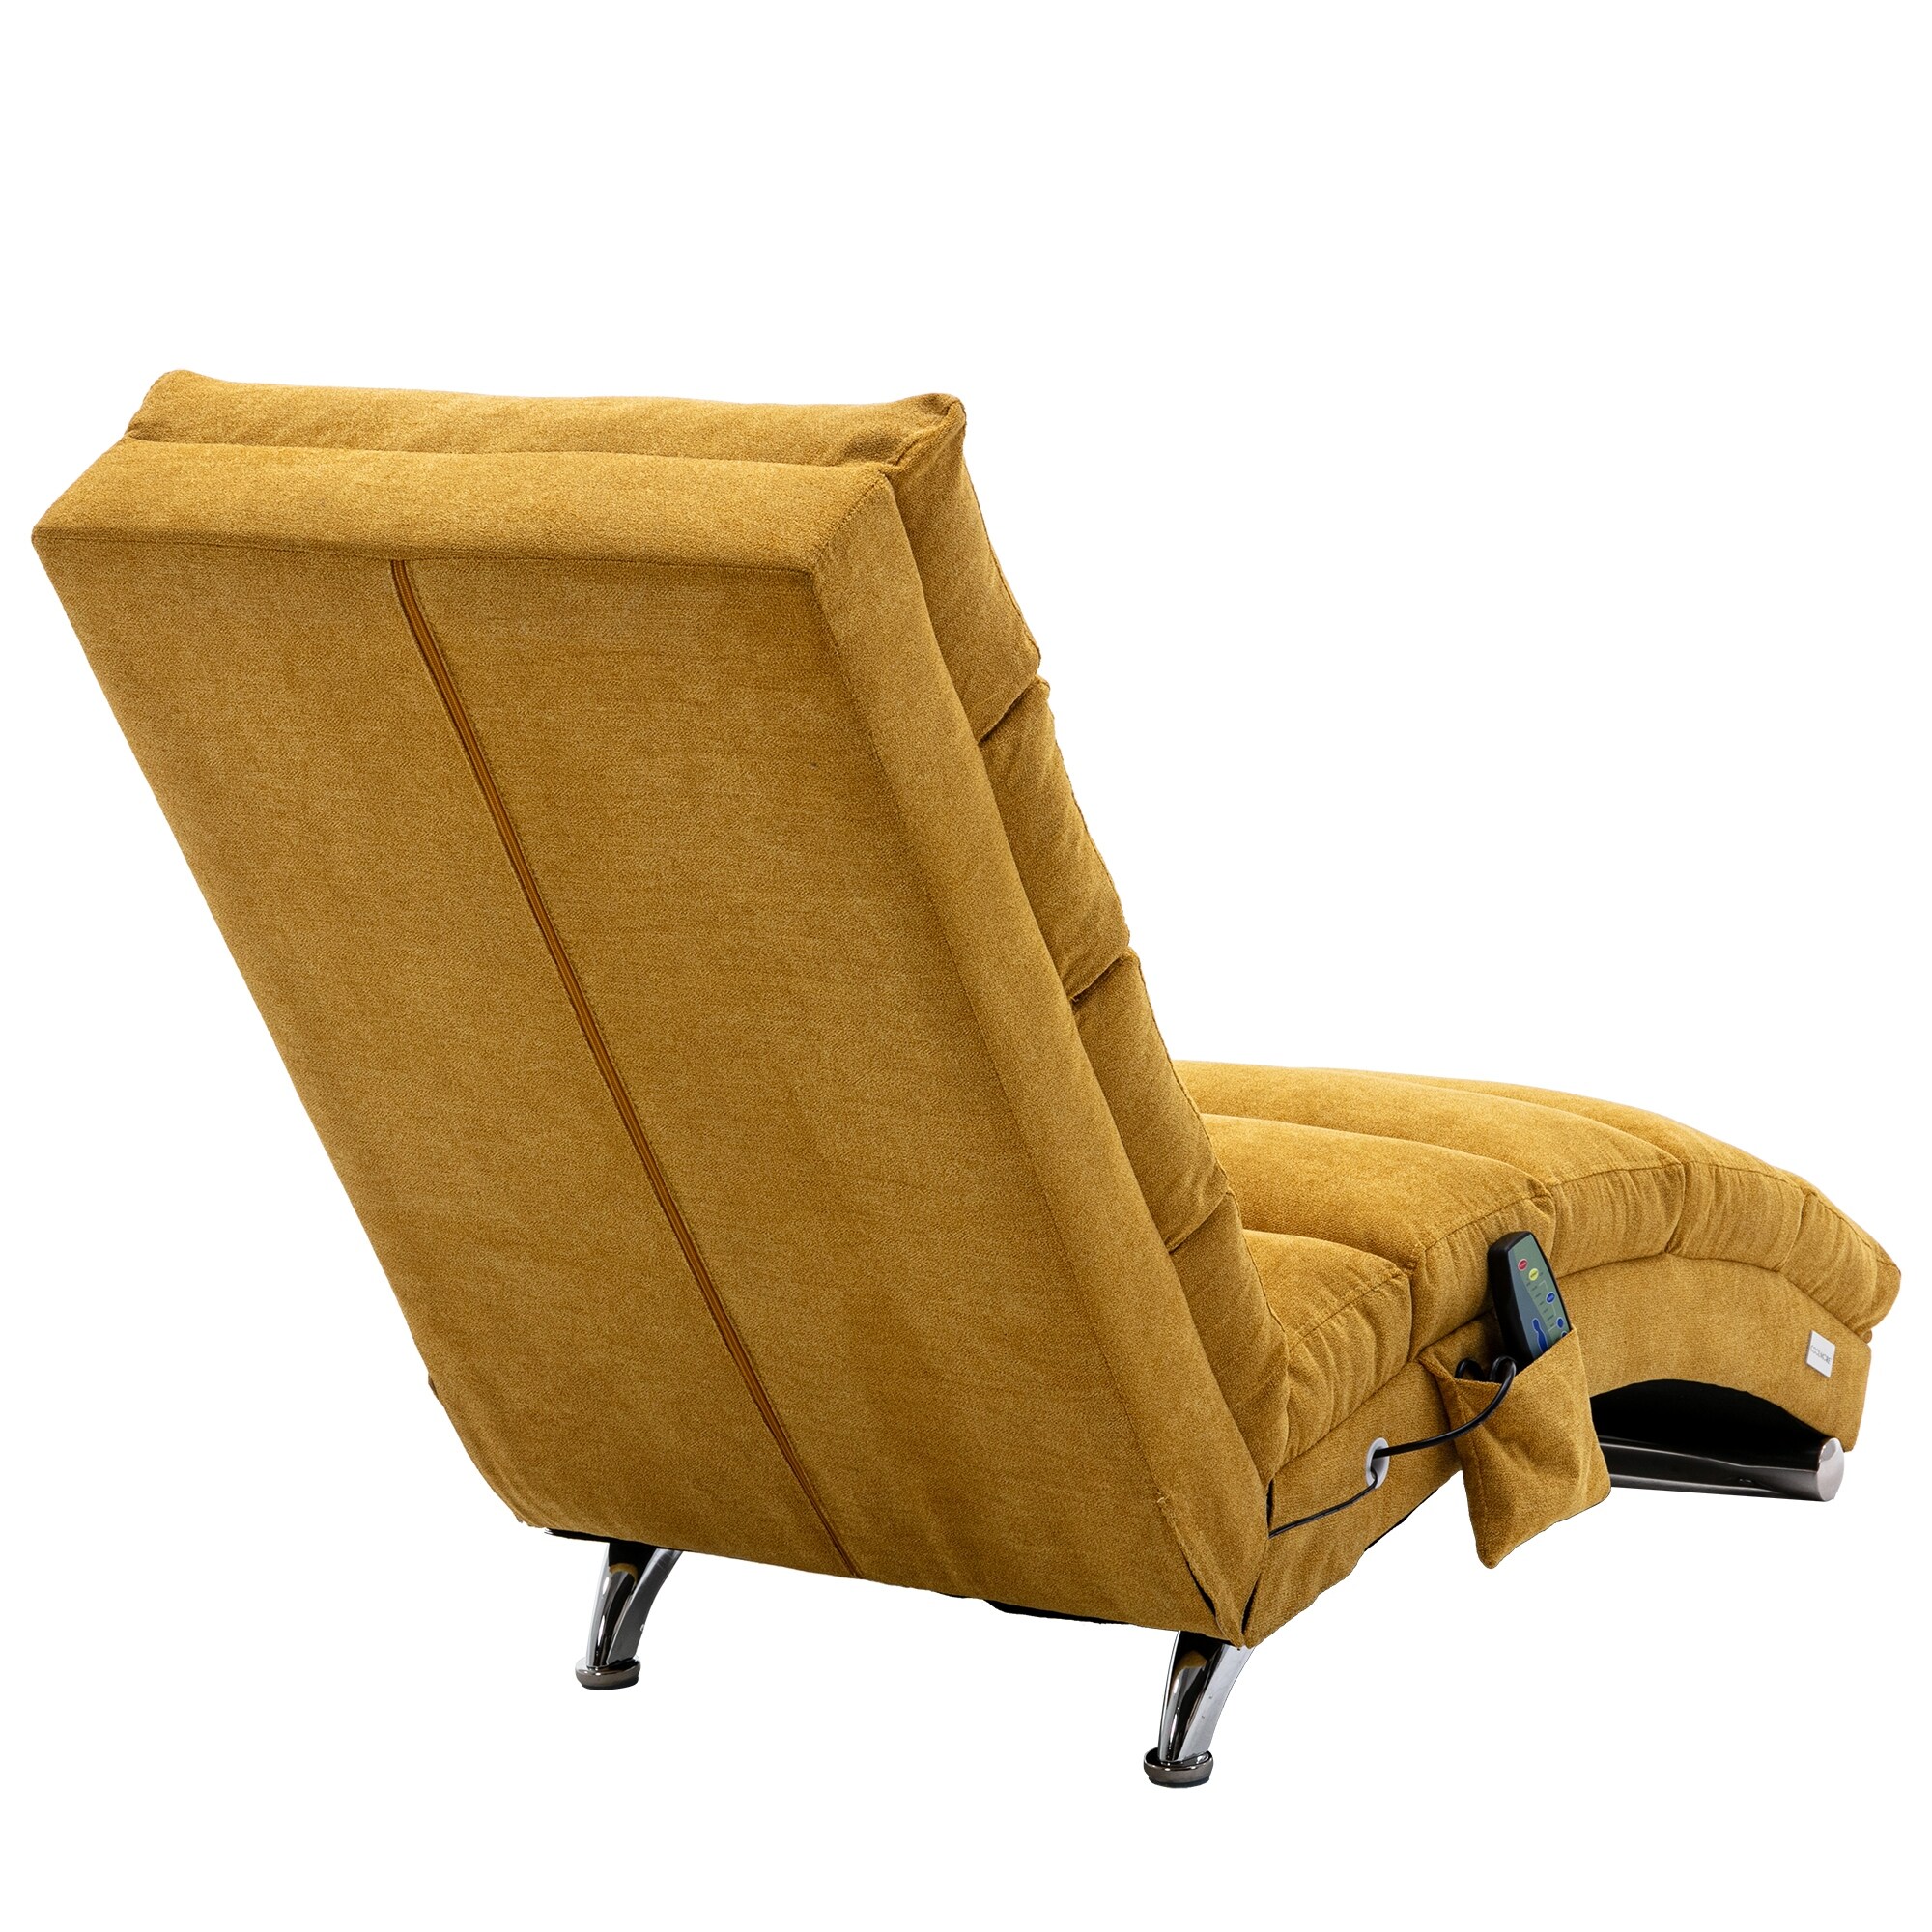 Armless Chaise Lounge Indoor Chair with Massage, Modern Long Lounger with a Side Pocket & Metal Legs for Office or Living Room